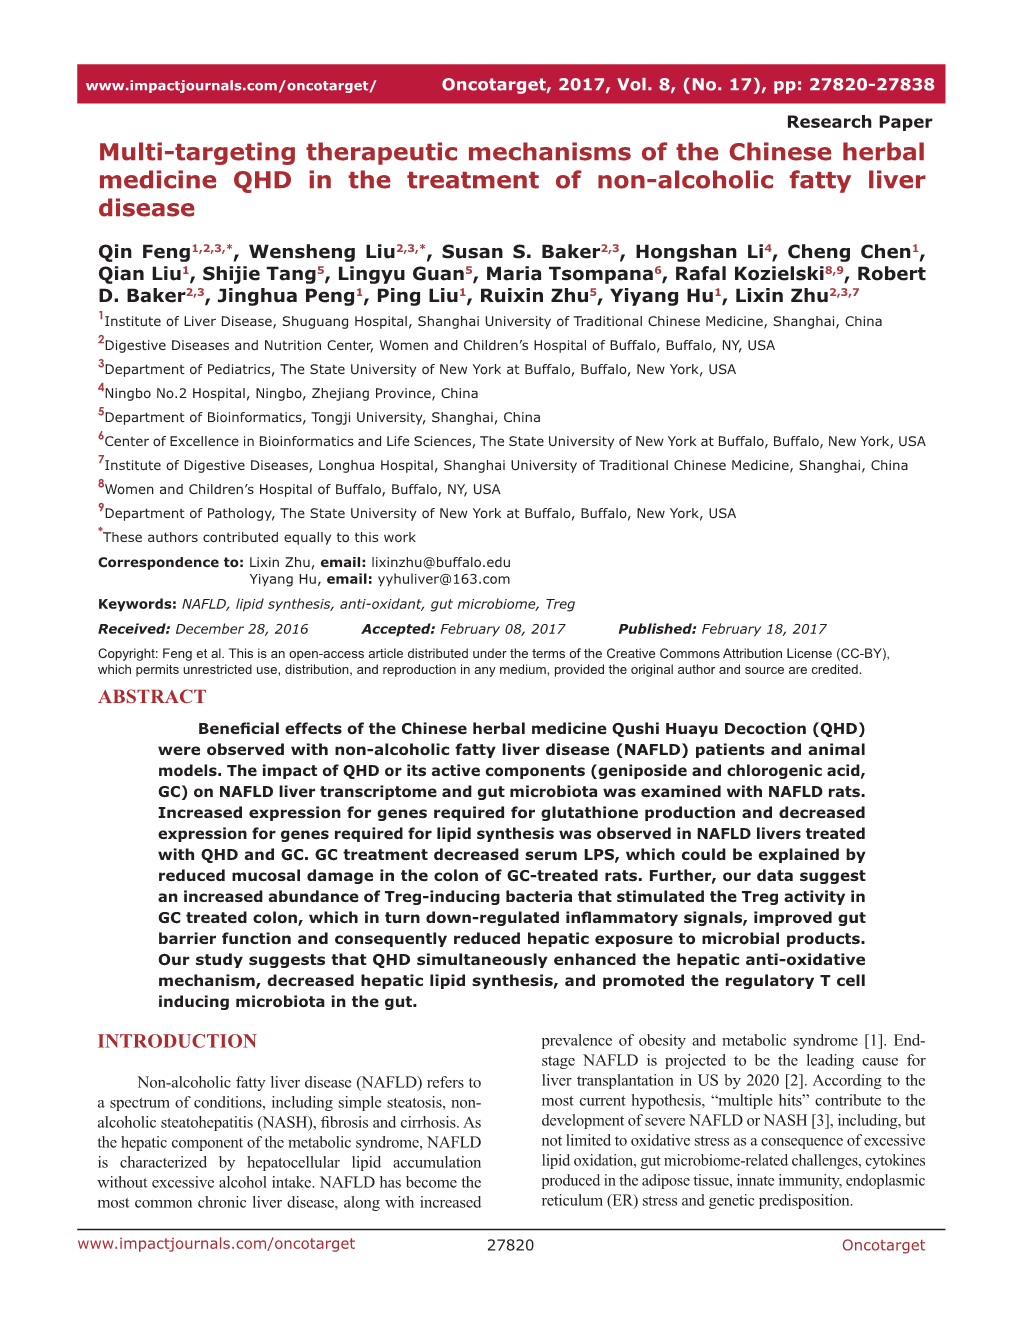 Multi-Targeting Therapeutic Mechanisms of the Chinese Herbal Medicine QHD in the Treatment of Non-Alcoholic Fatty Liver Disease